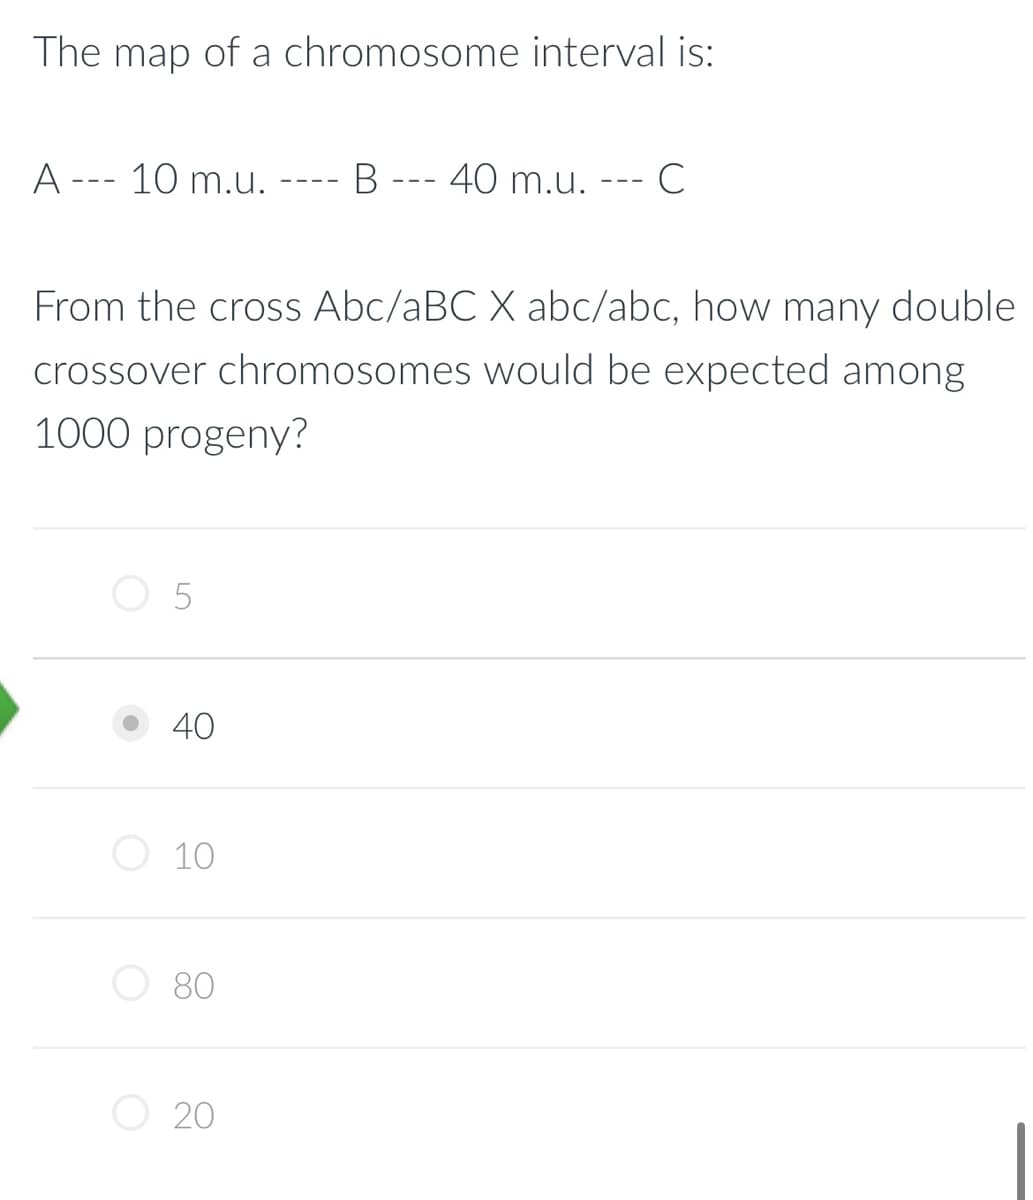 The map of a chromosome interval is:
A
---
10 m.u.
5
40
From the cross Abc/aBC X abc/abc, how many double
crossover chromosomes would be expected among
1000 progeny?
10
80
B
20
- 40 m.u.
C